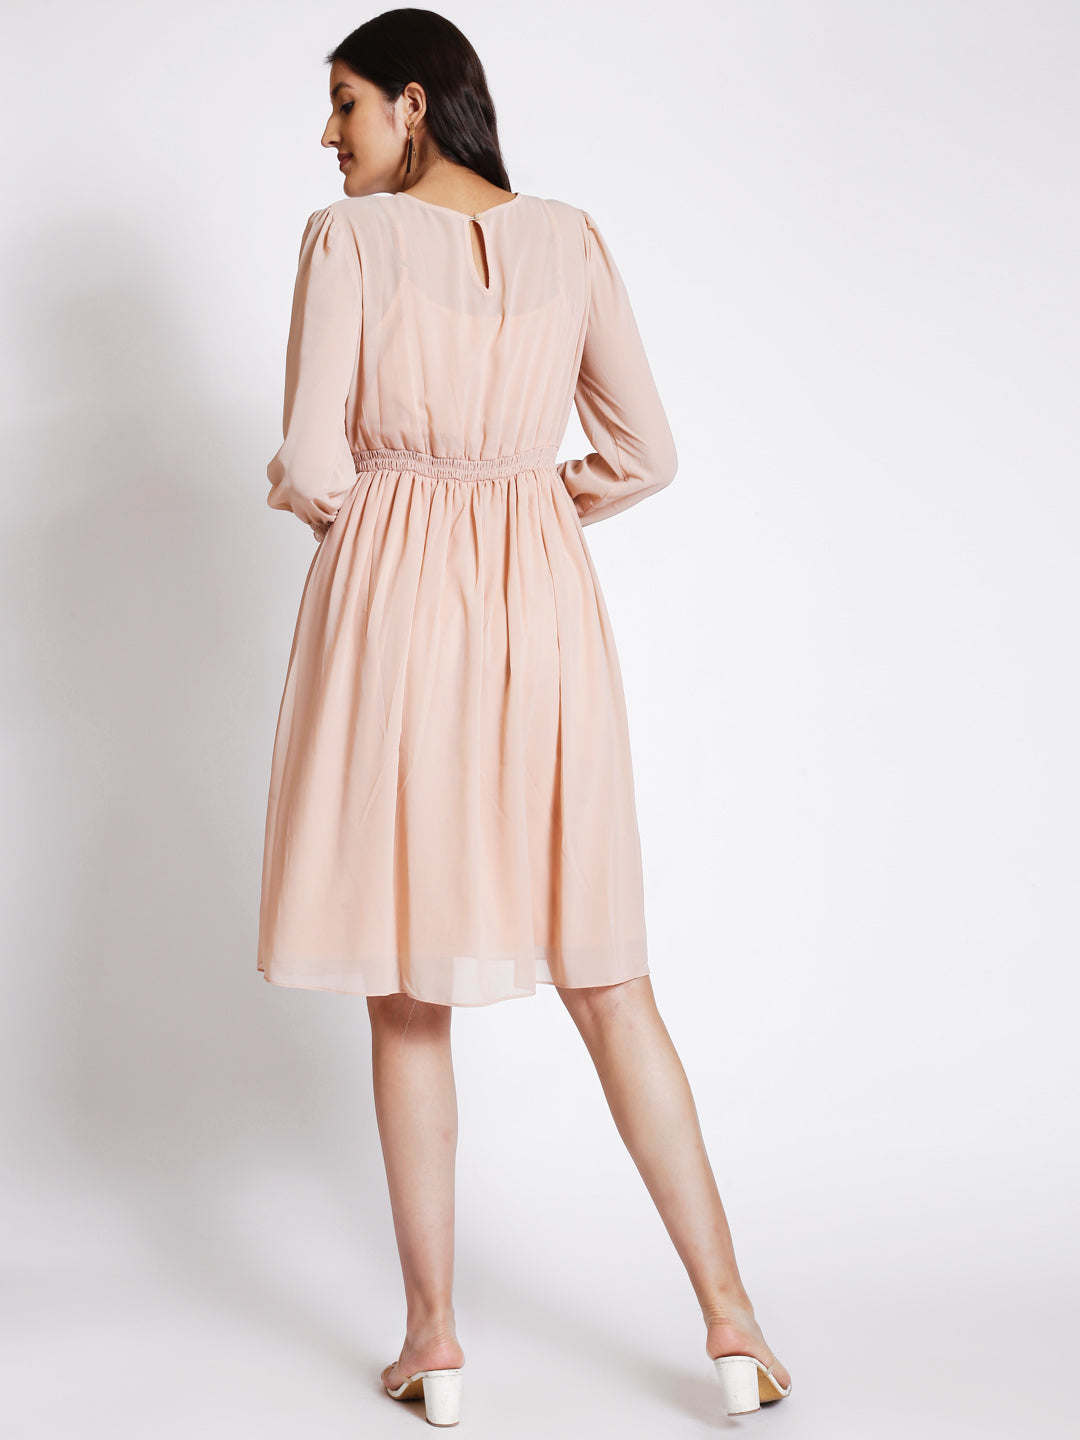 Puff Sleeves Embroidered Fit & Flare Dress